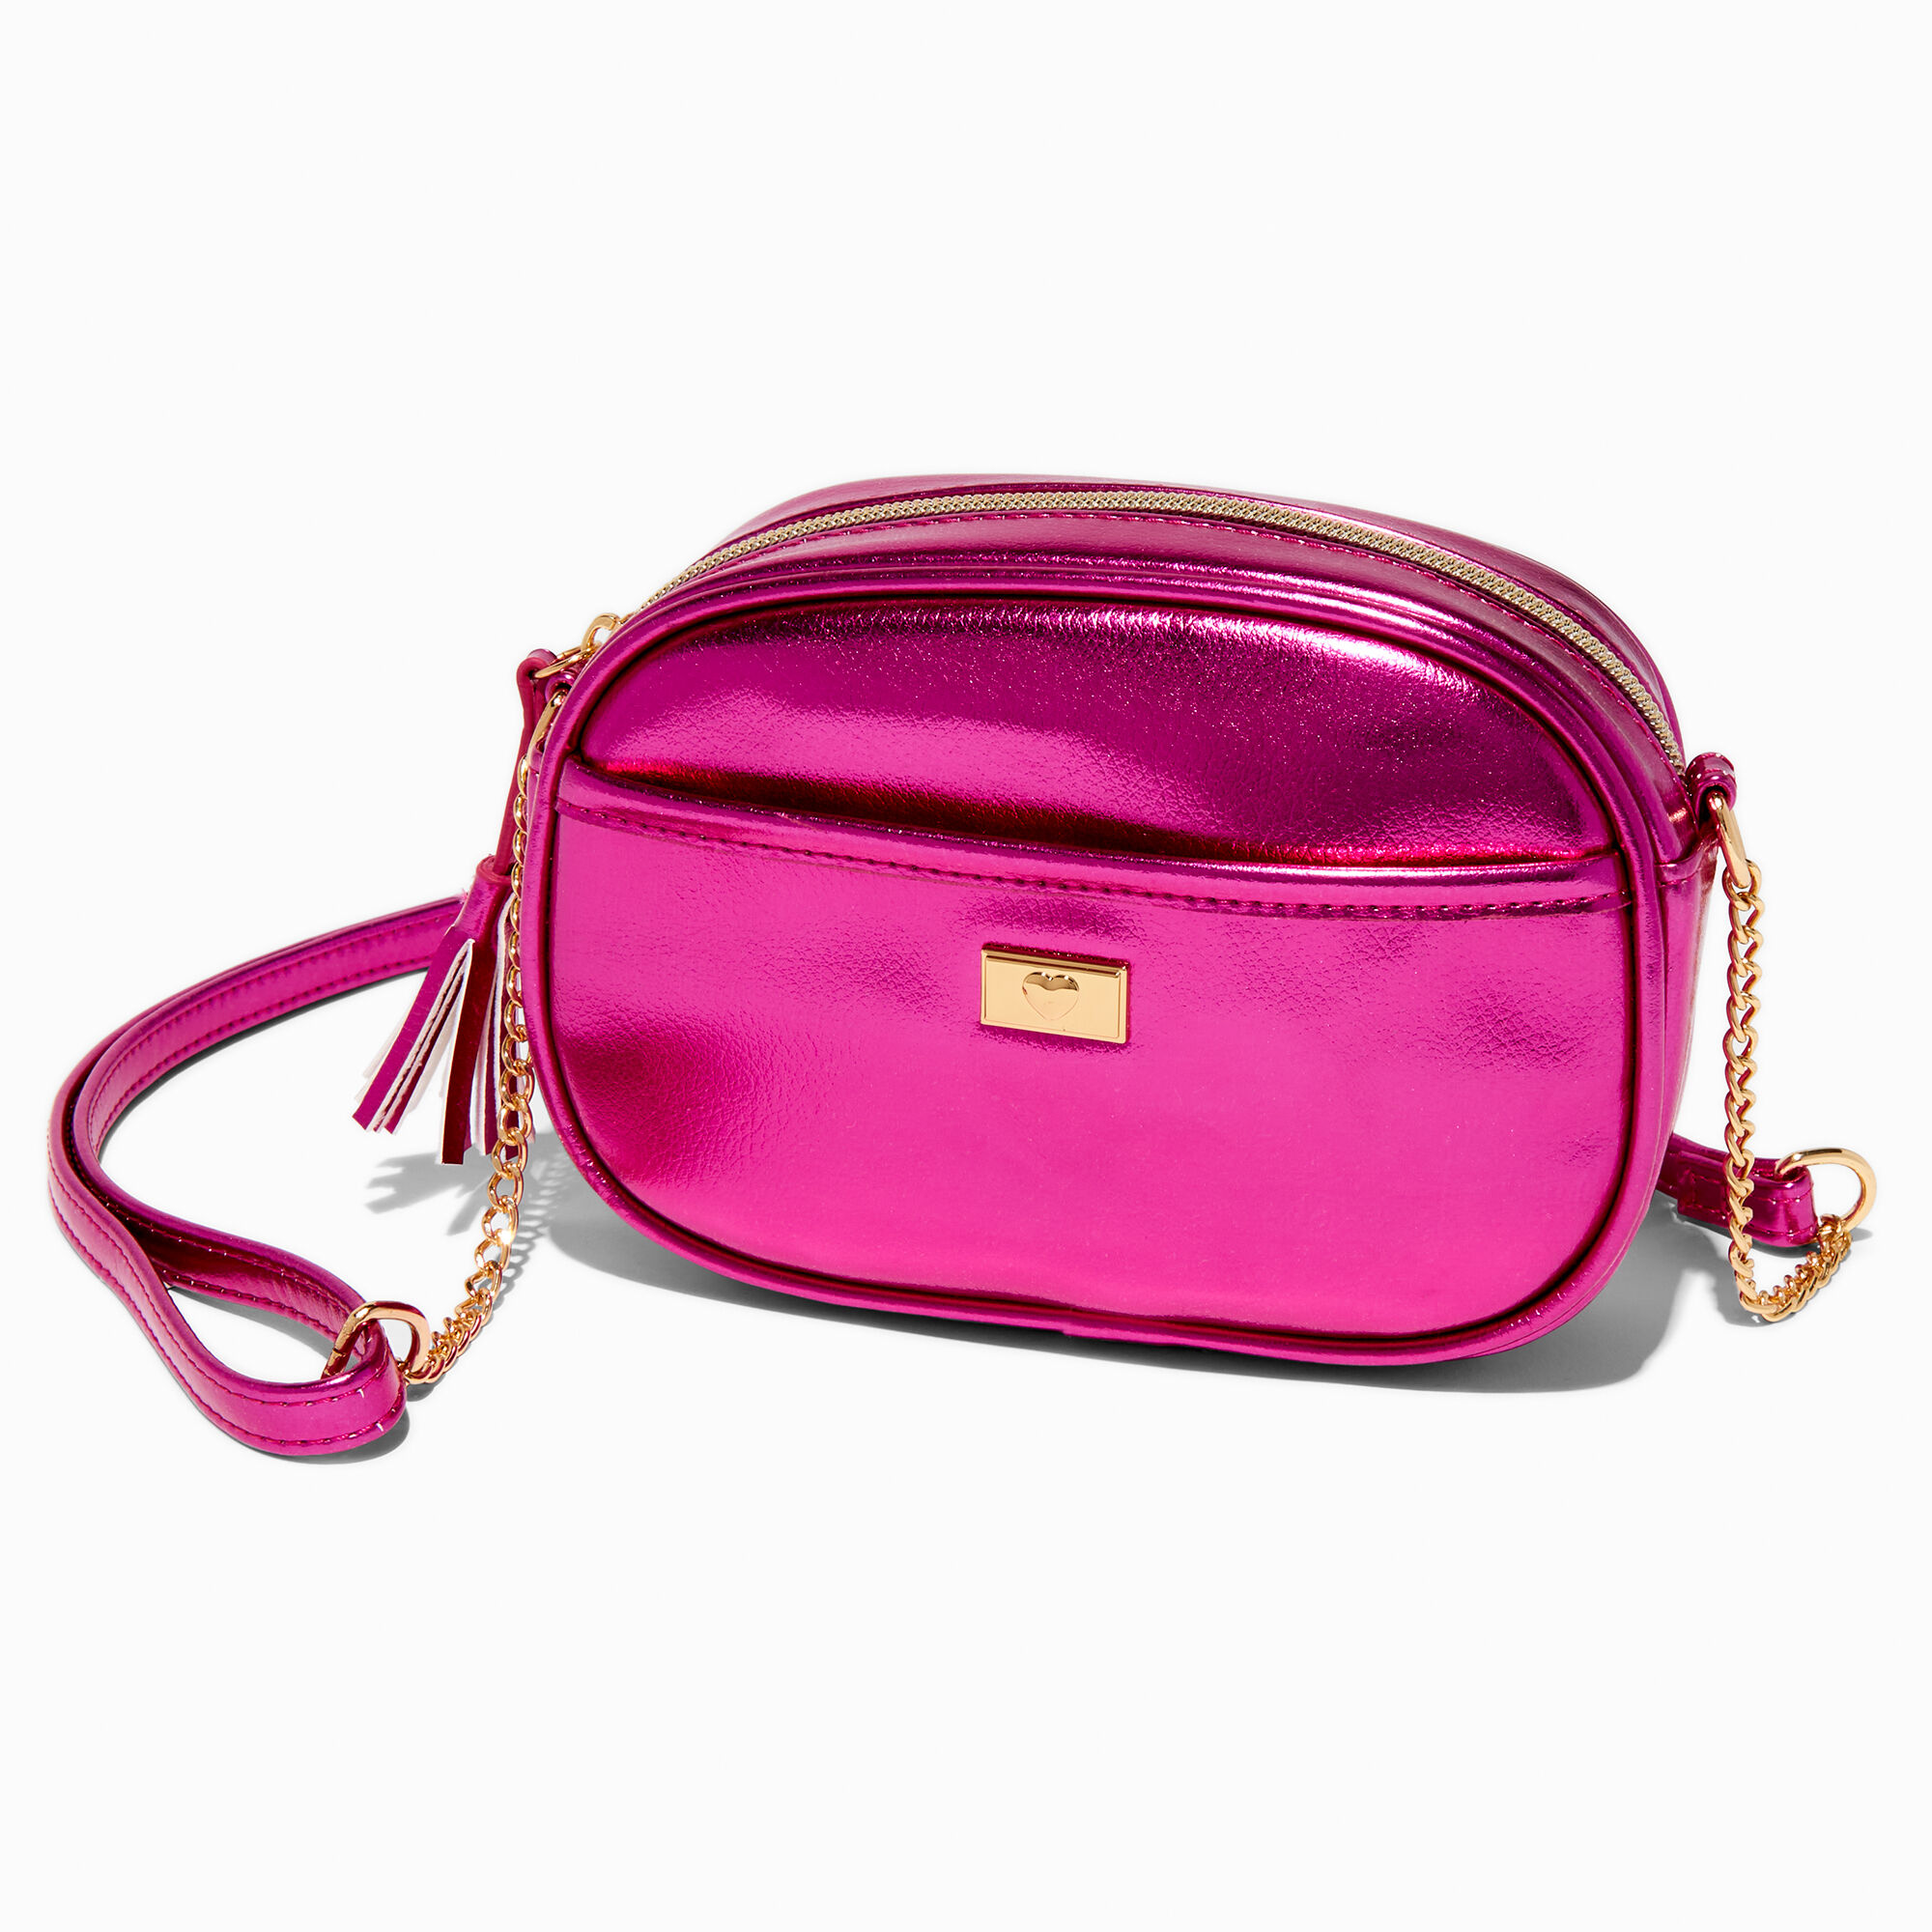 View Claires Iridescent Oval Crossbody Bag Pink information